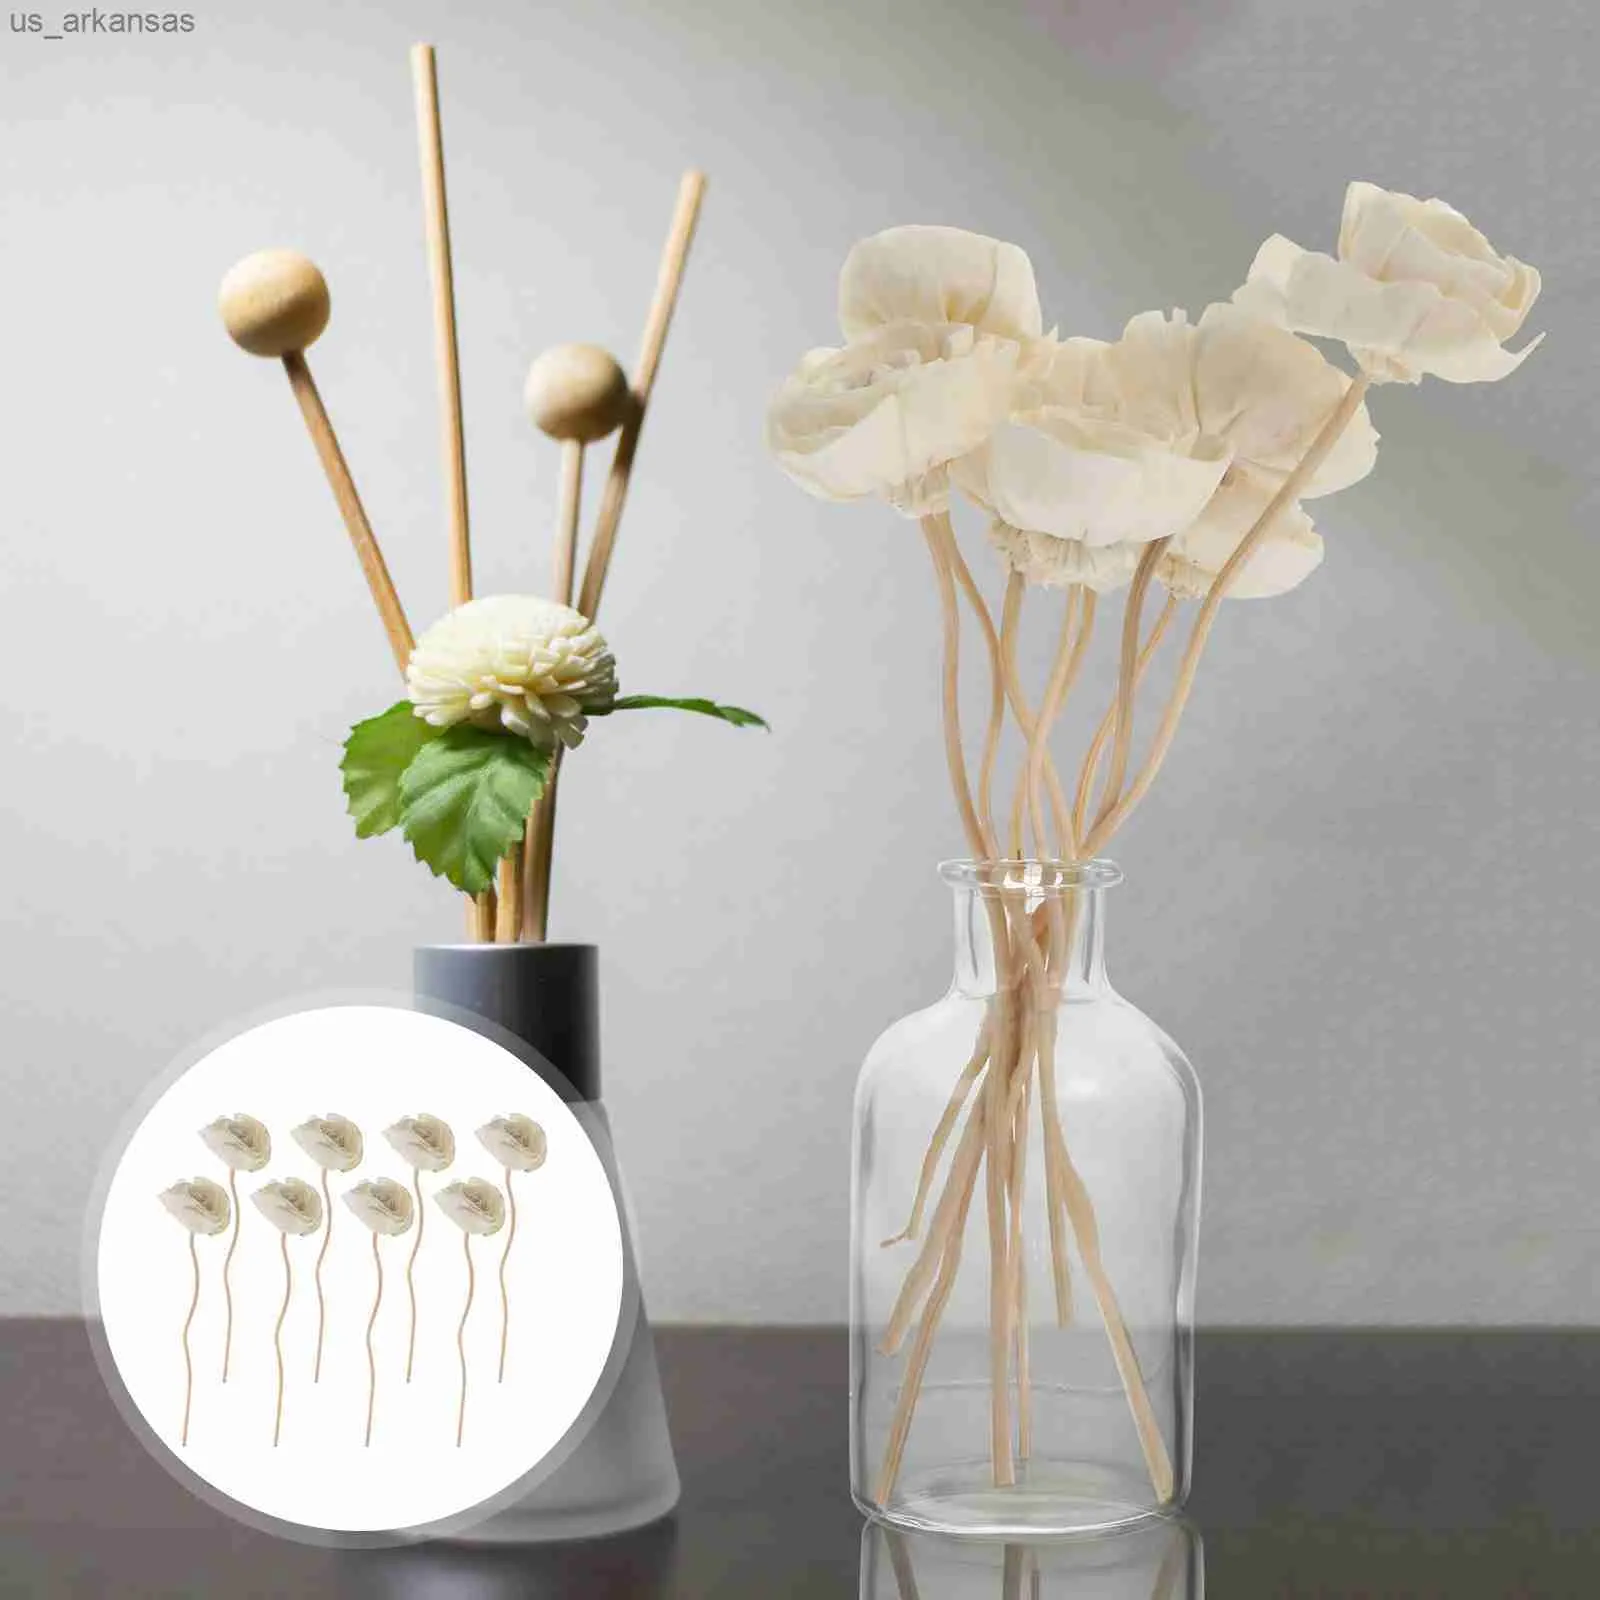 8 PCS Tong Grass Flower White Artificial Roses Arom Diffuser Rattans Sticks Parfym Essential Oil Vines Bride Reed L230523